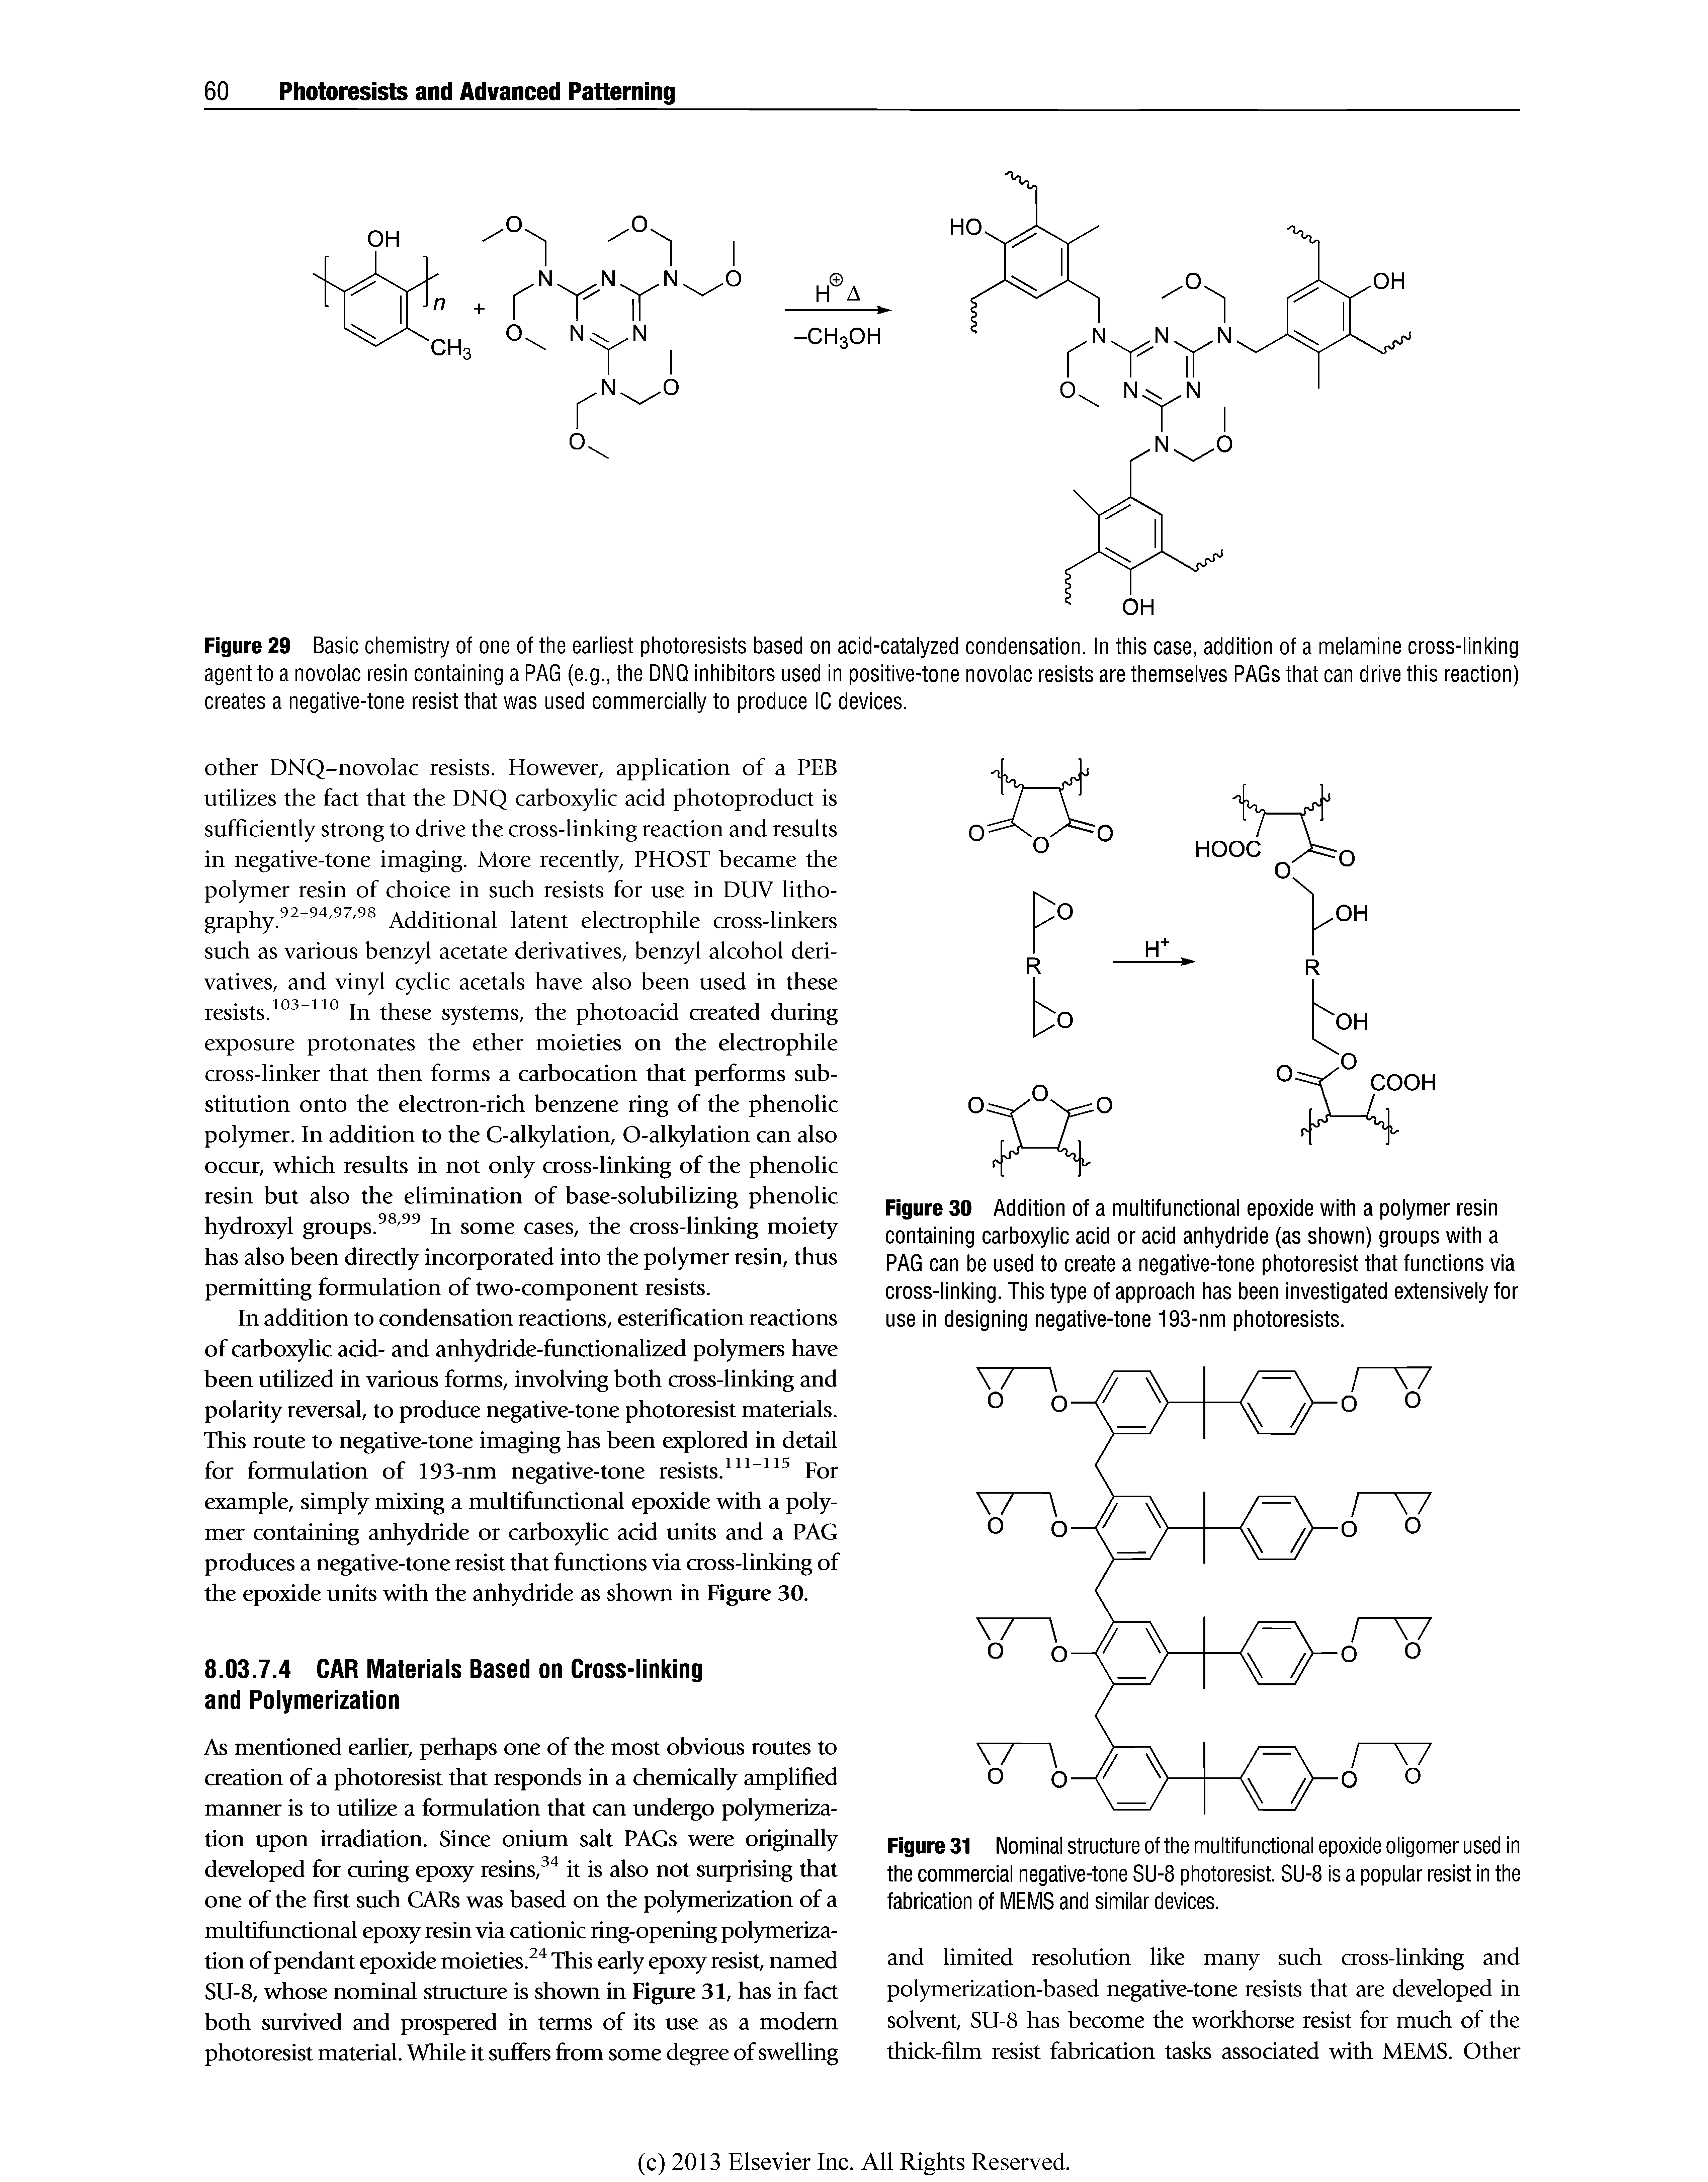 Figure 30 Addition of a multifunctional epoxide with a polymer resin containing carboxylic acid or acid anhydride (as shown) groups with a PAG can be used to create a negative-tone photoresist that functions via cross-linking. This type of approach has been investigated extensively for use in designing negative-tone 193-nm photoresists.